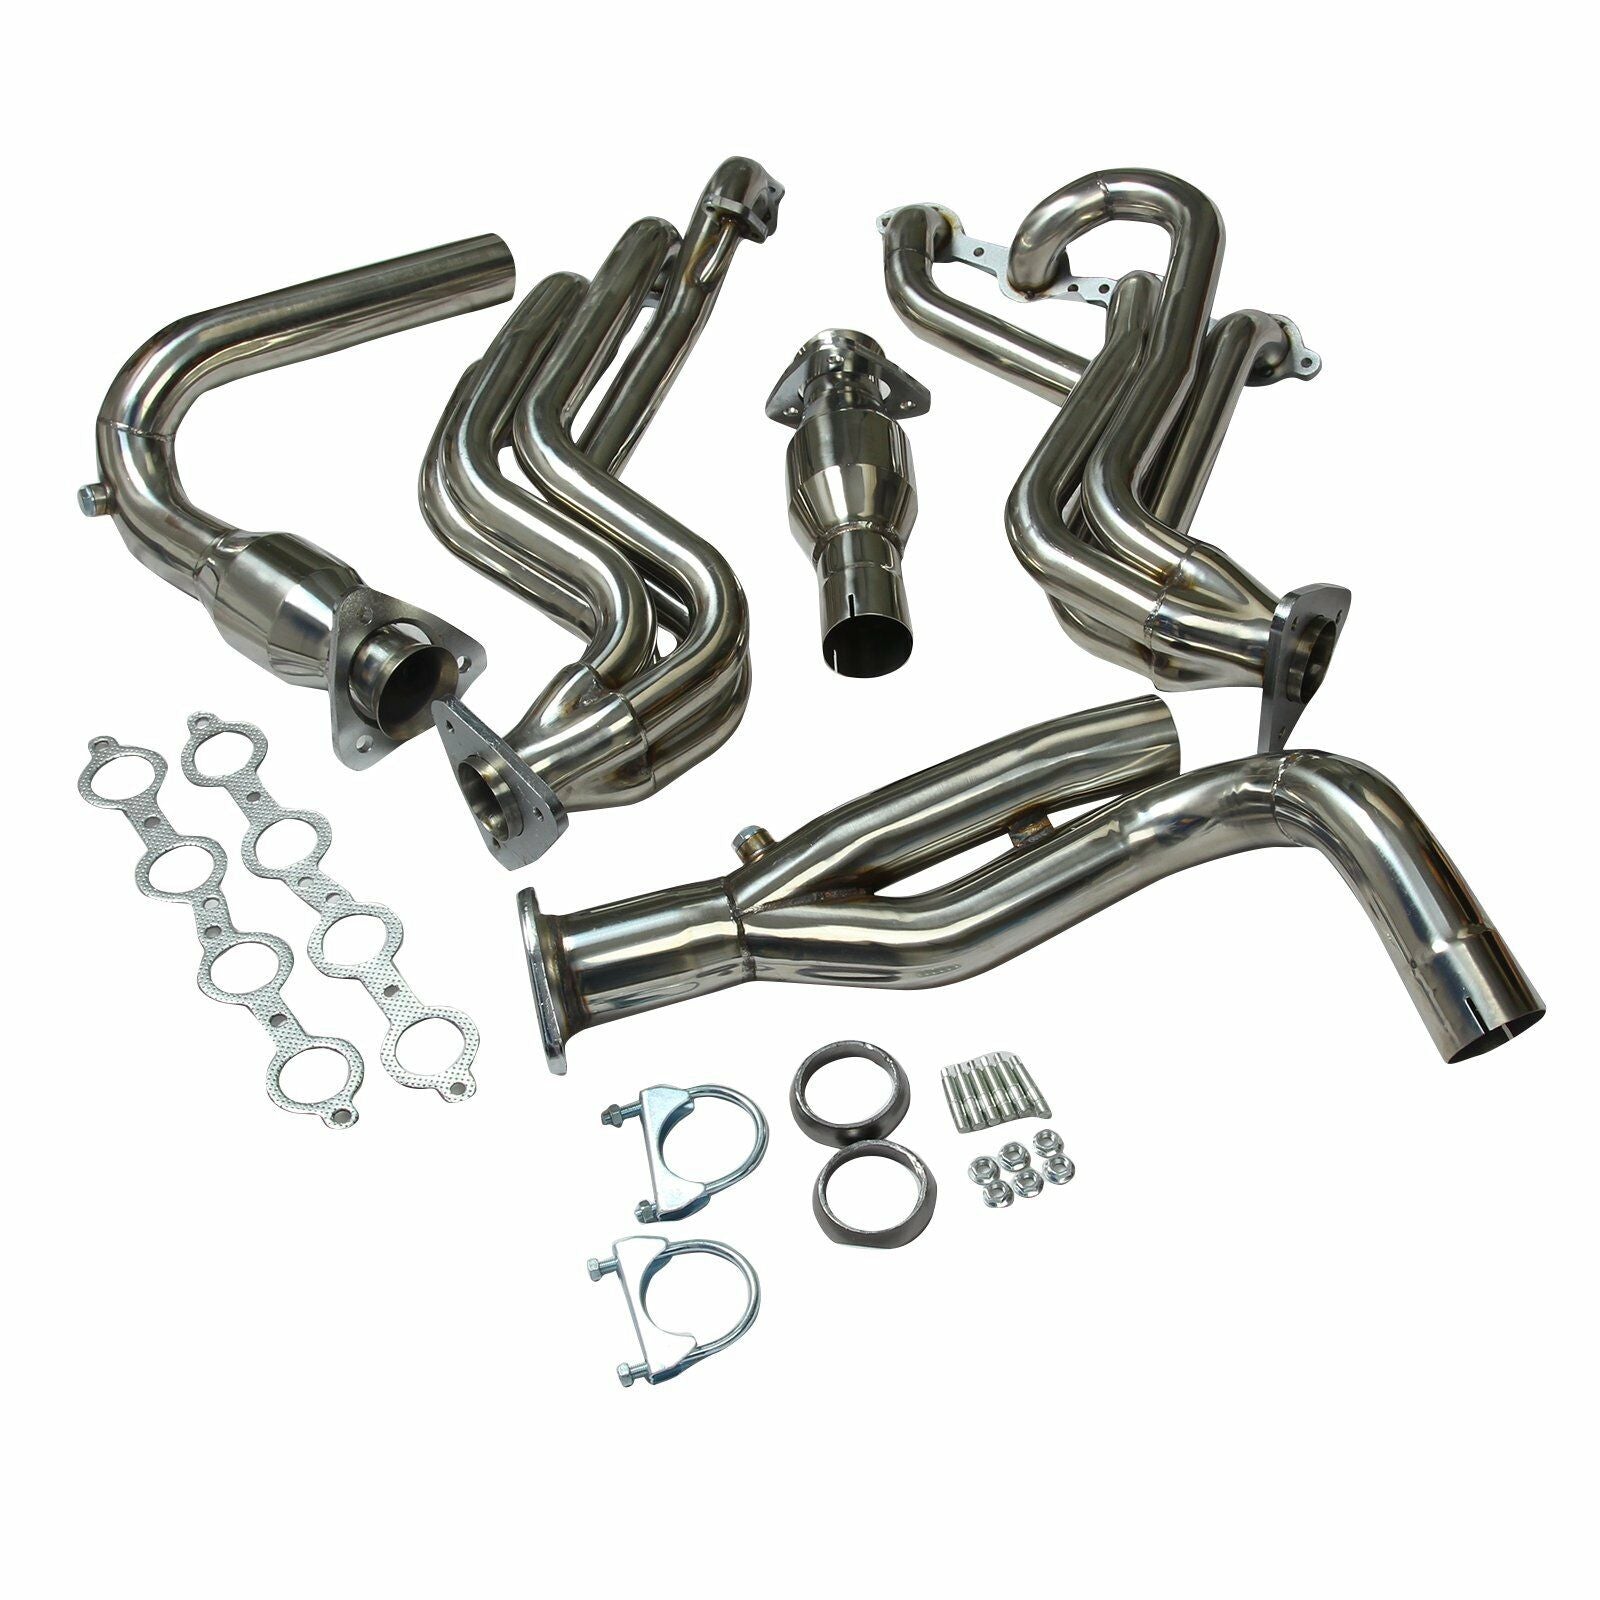 Exhaust Header & Y-Pipe For 1999-2005 Chevy GMT800 V8 Engine Truck